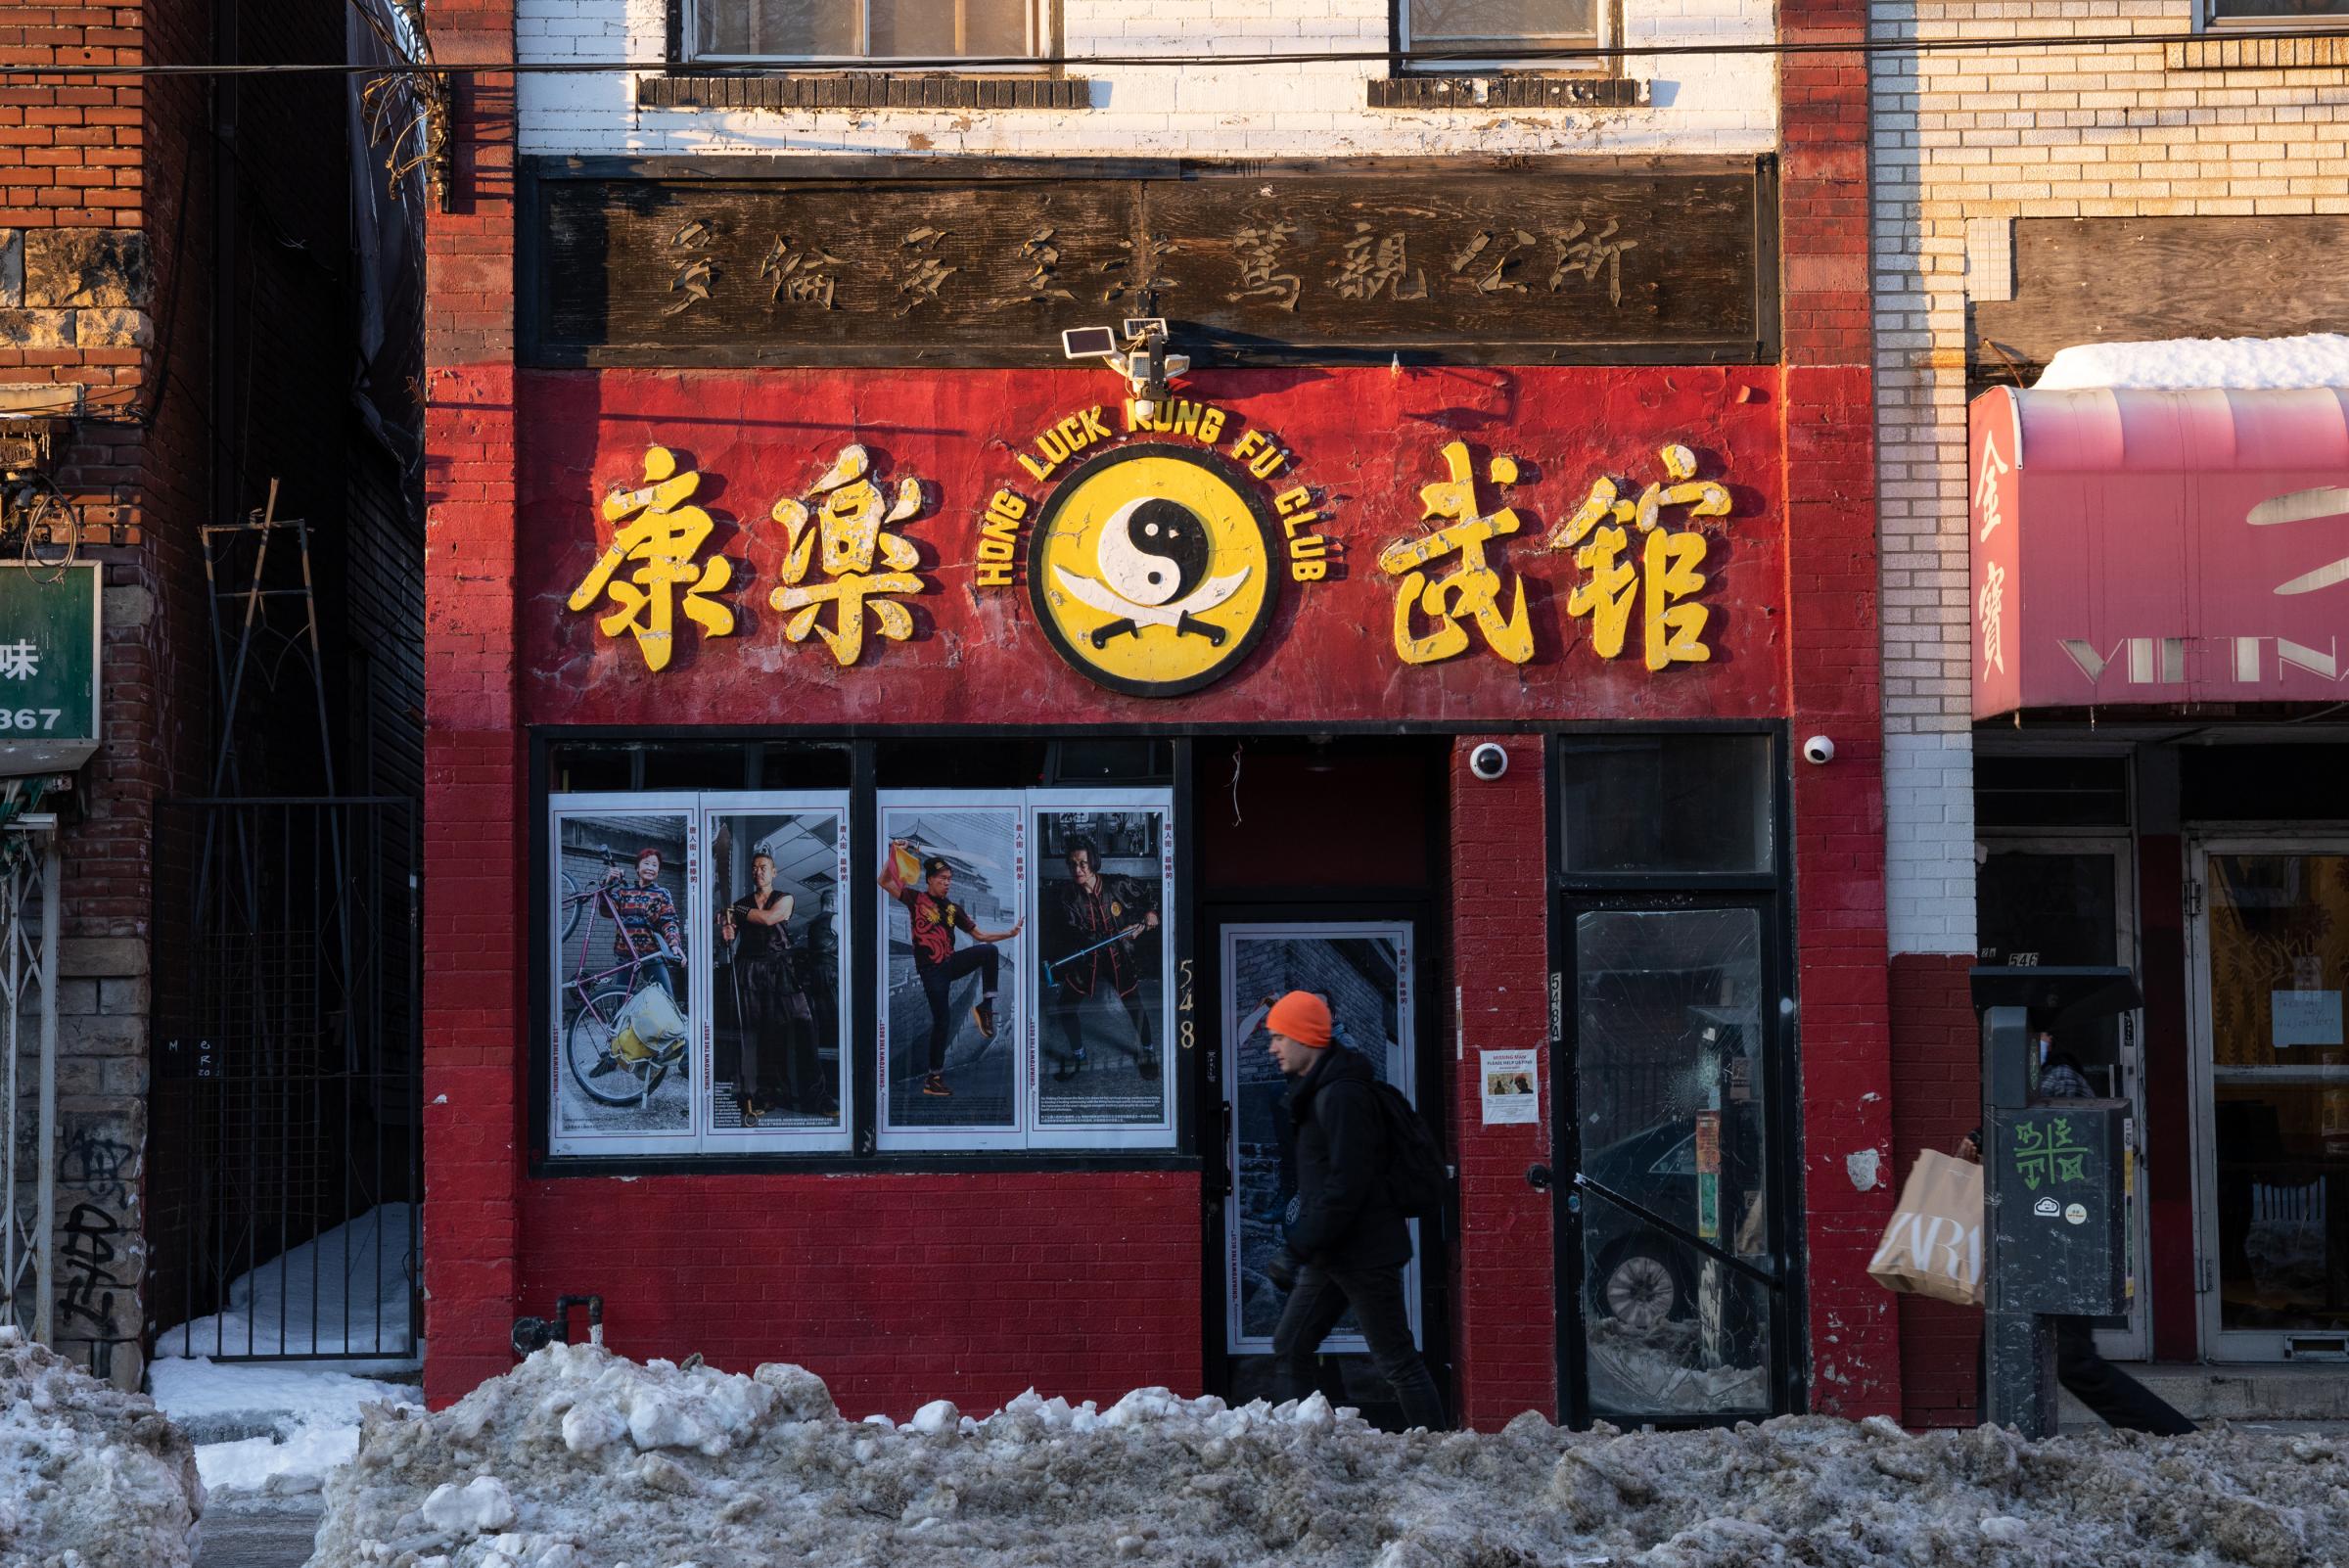 A person walks by the Hong Luck Kung Fu Club on the edge of Toronto’s Chinatown on January 20, 2022. Portraits from the ‘Best of Chinatown’ window exhibition by local Chinatown art initiative ‘Long Time No See’ is pasted on the windows. Hong Luck Kung Fu Club is a multi-generational martial arts studio in Toronto’s Chinatown, which started in 1961. With Chinese New Year around the corner, this group is preparing for lion dance performances for the local senior community, as a symbolic act to bring in health, luck, and life. (Photo by Katherine Cheng/Globe and Mail).